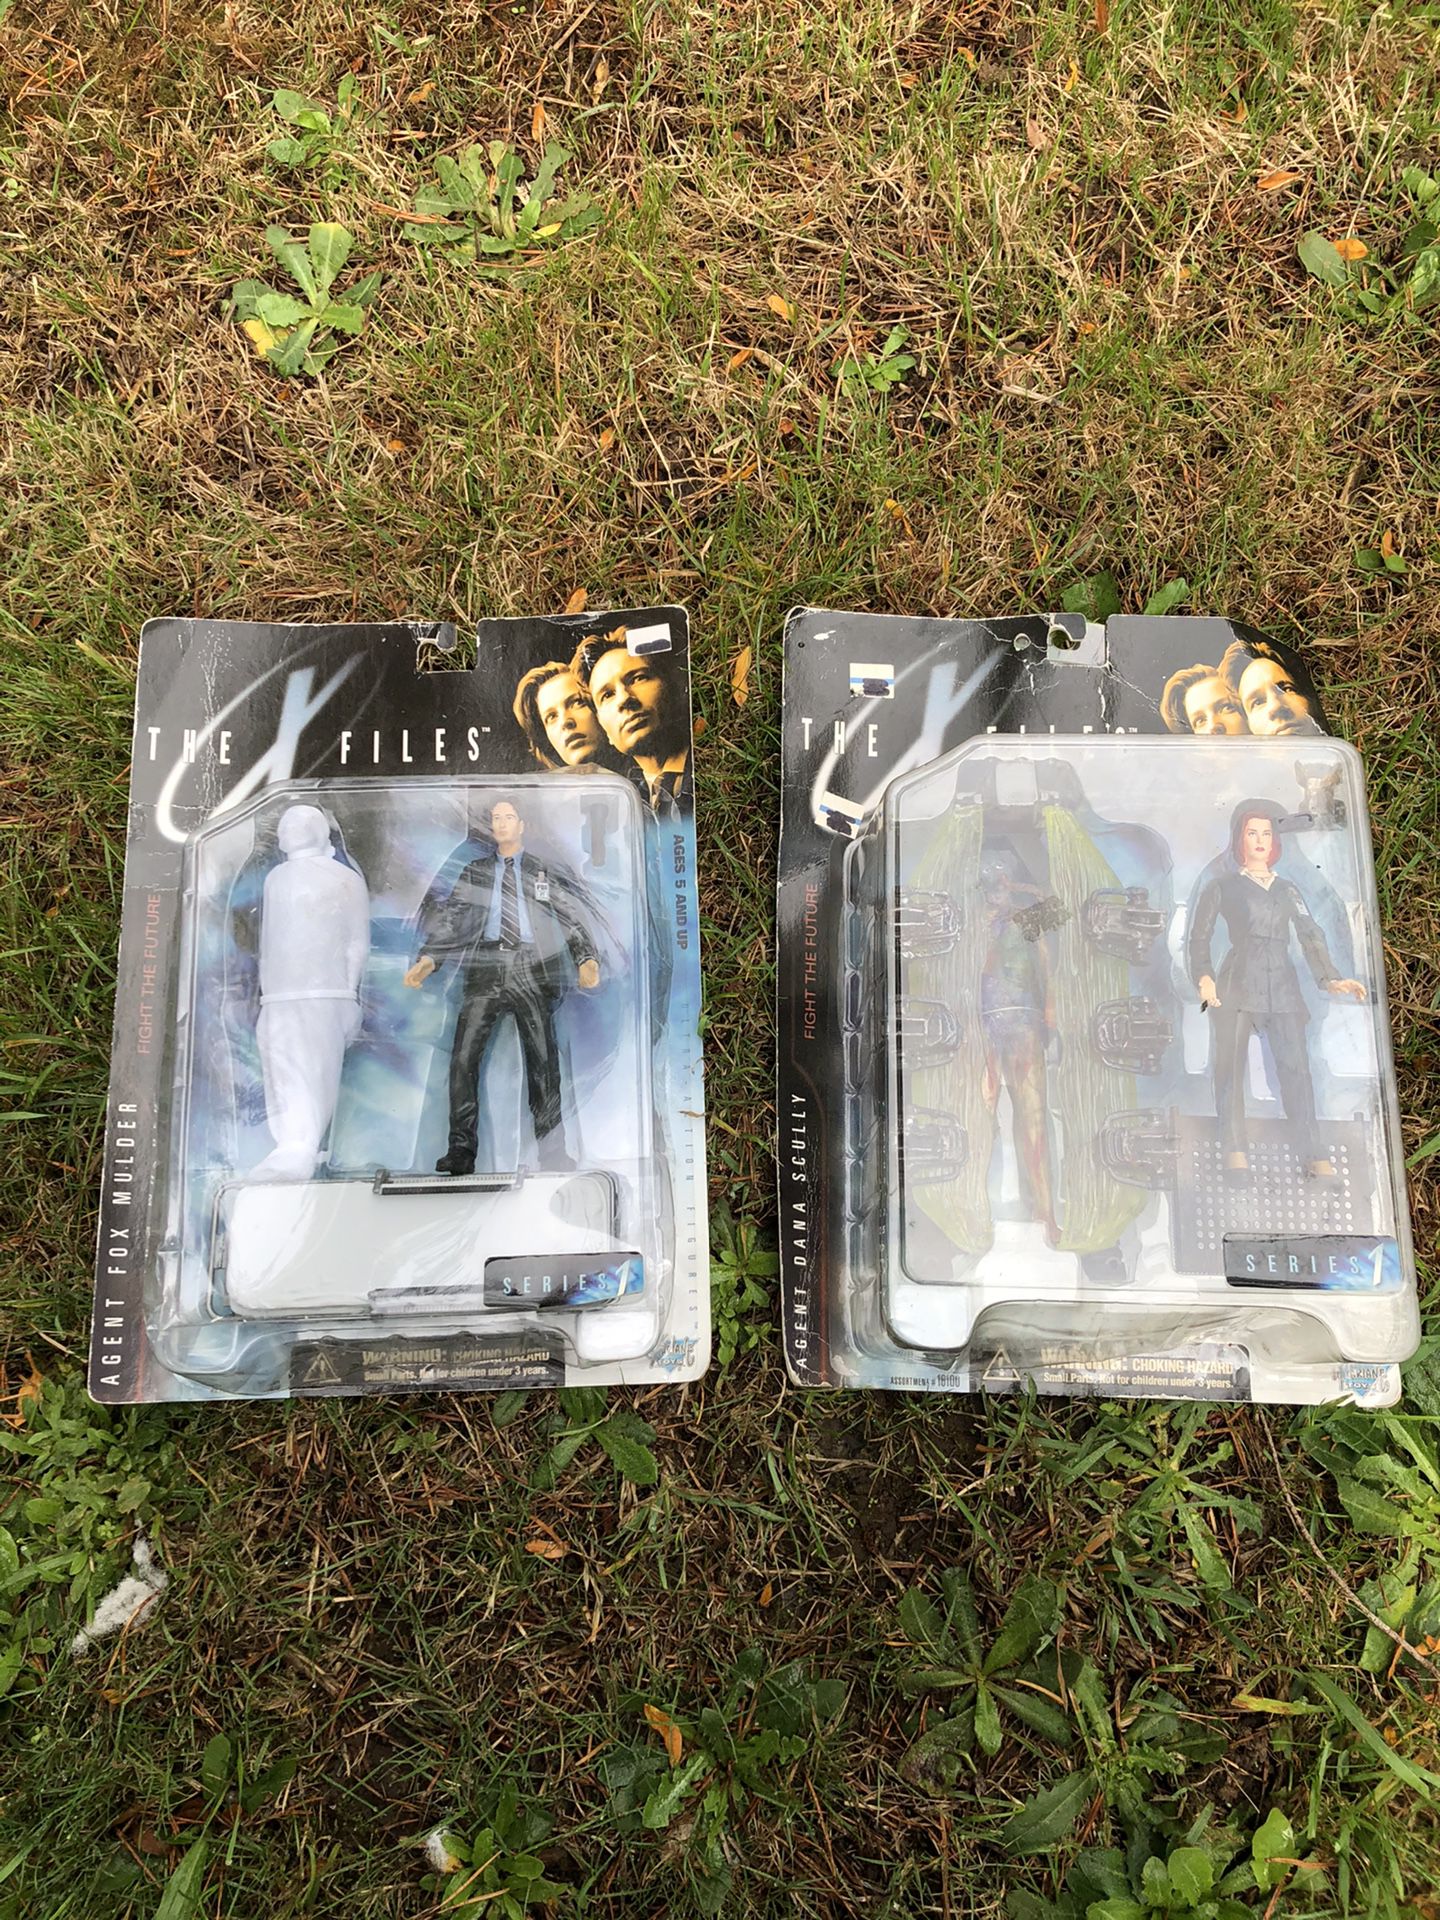 X-files action figures